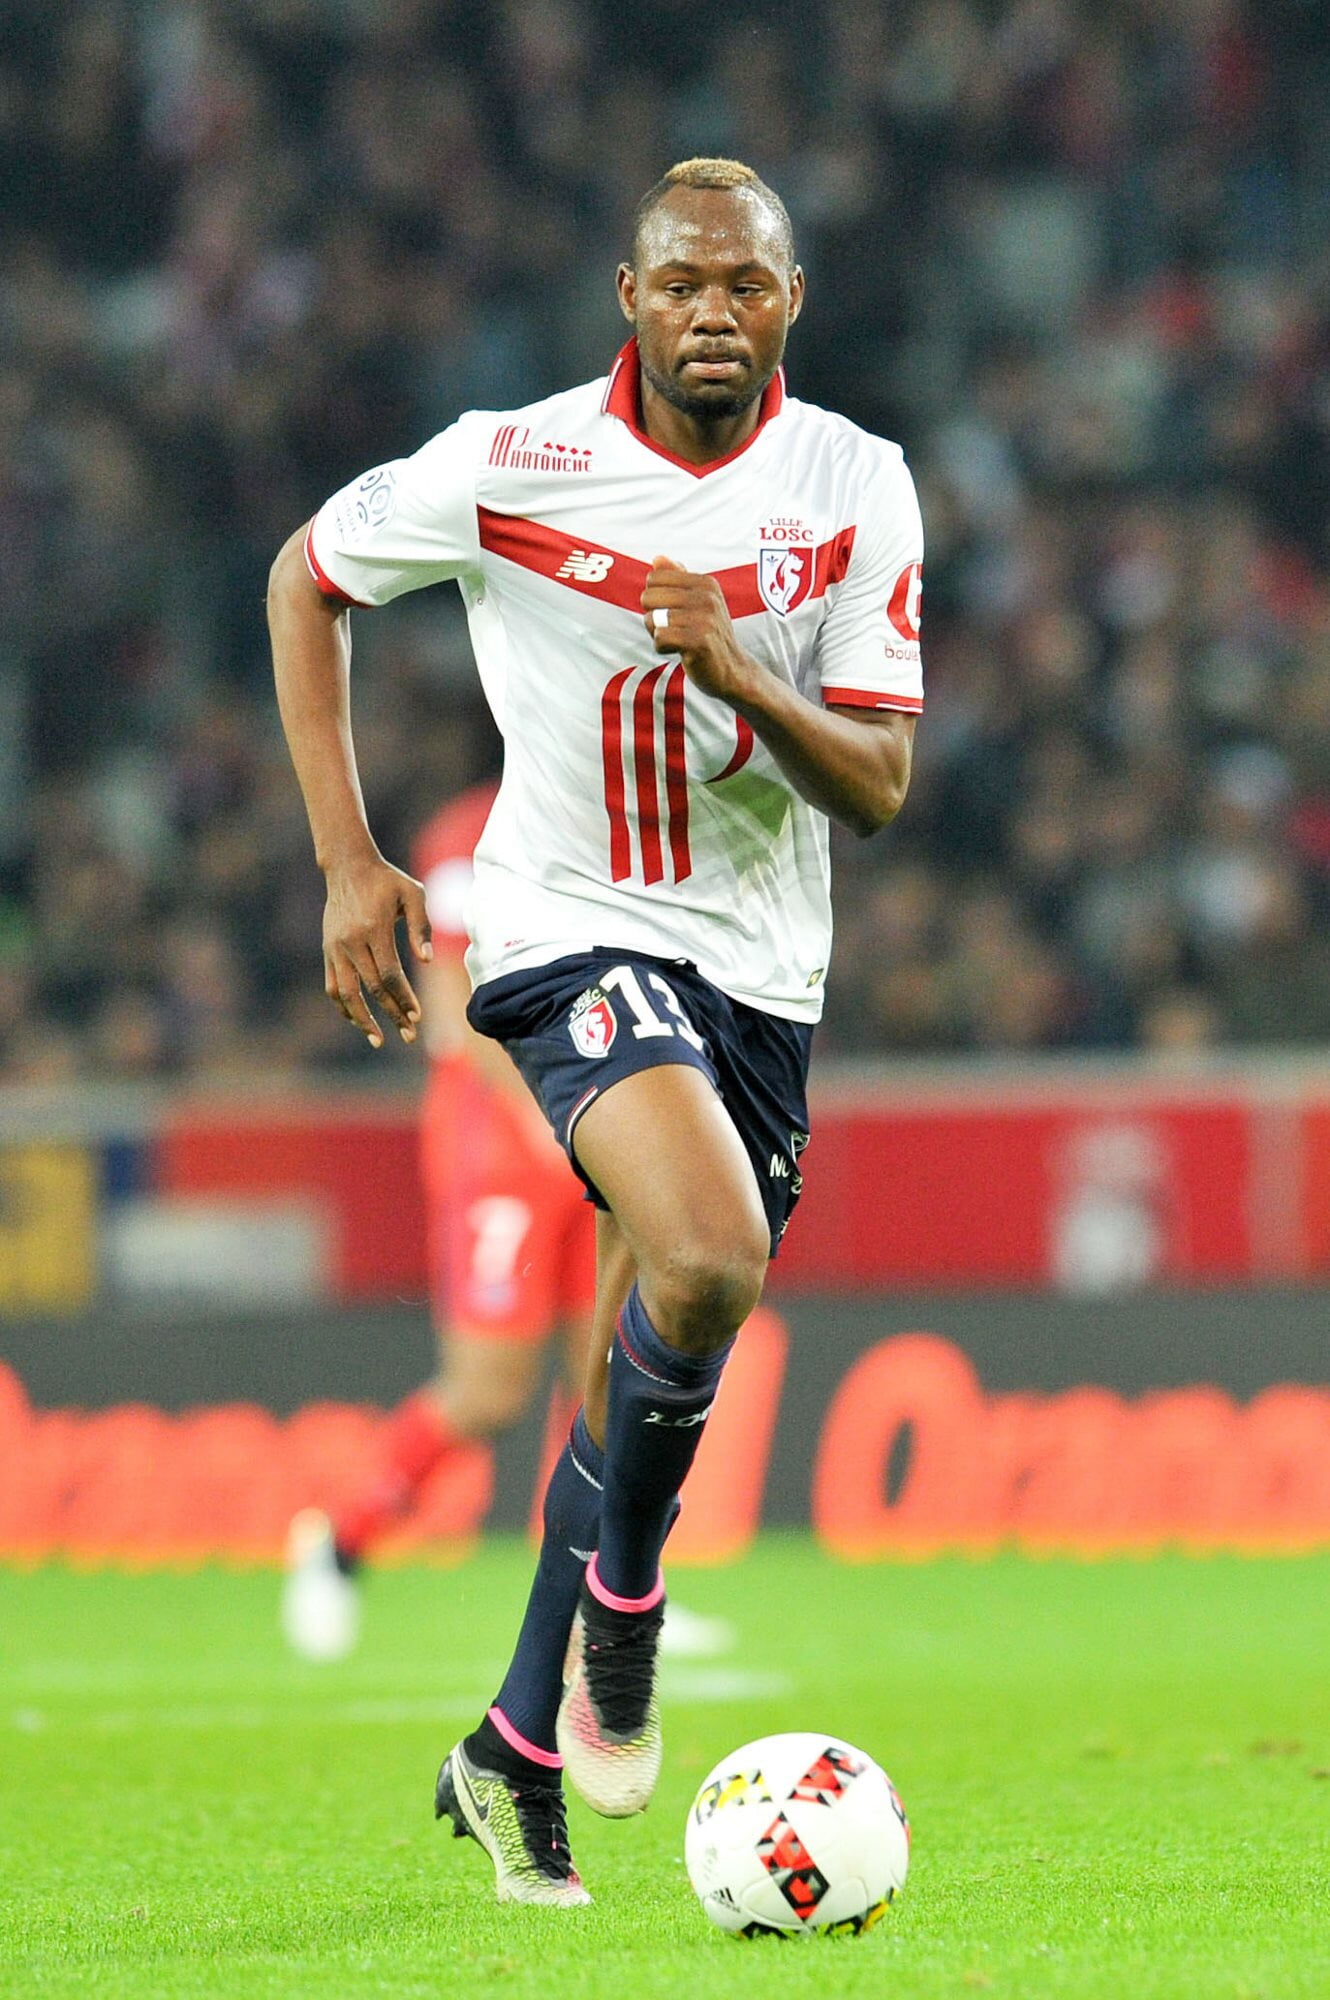 Stoppila Sunzu while at Lille